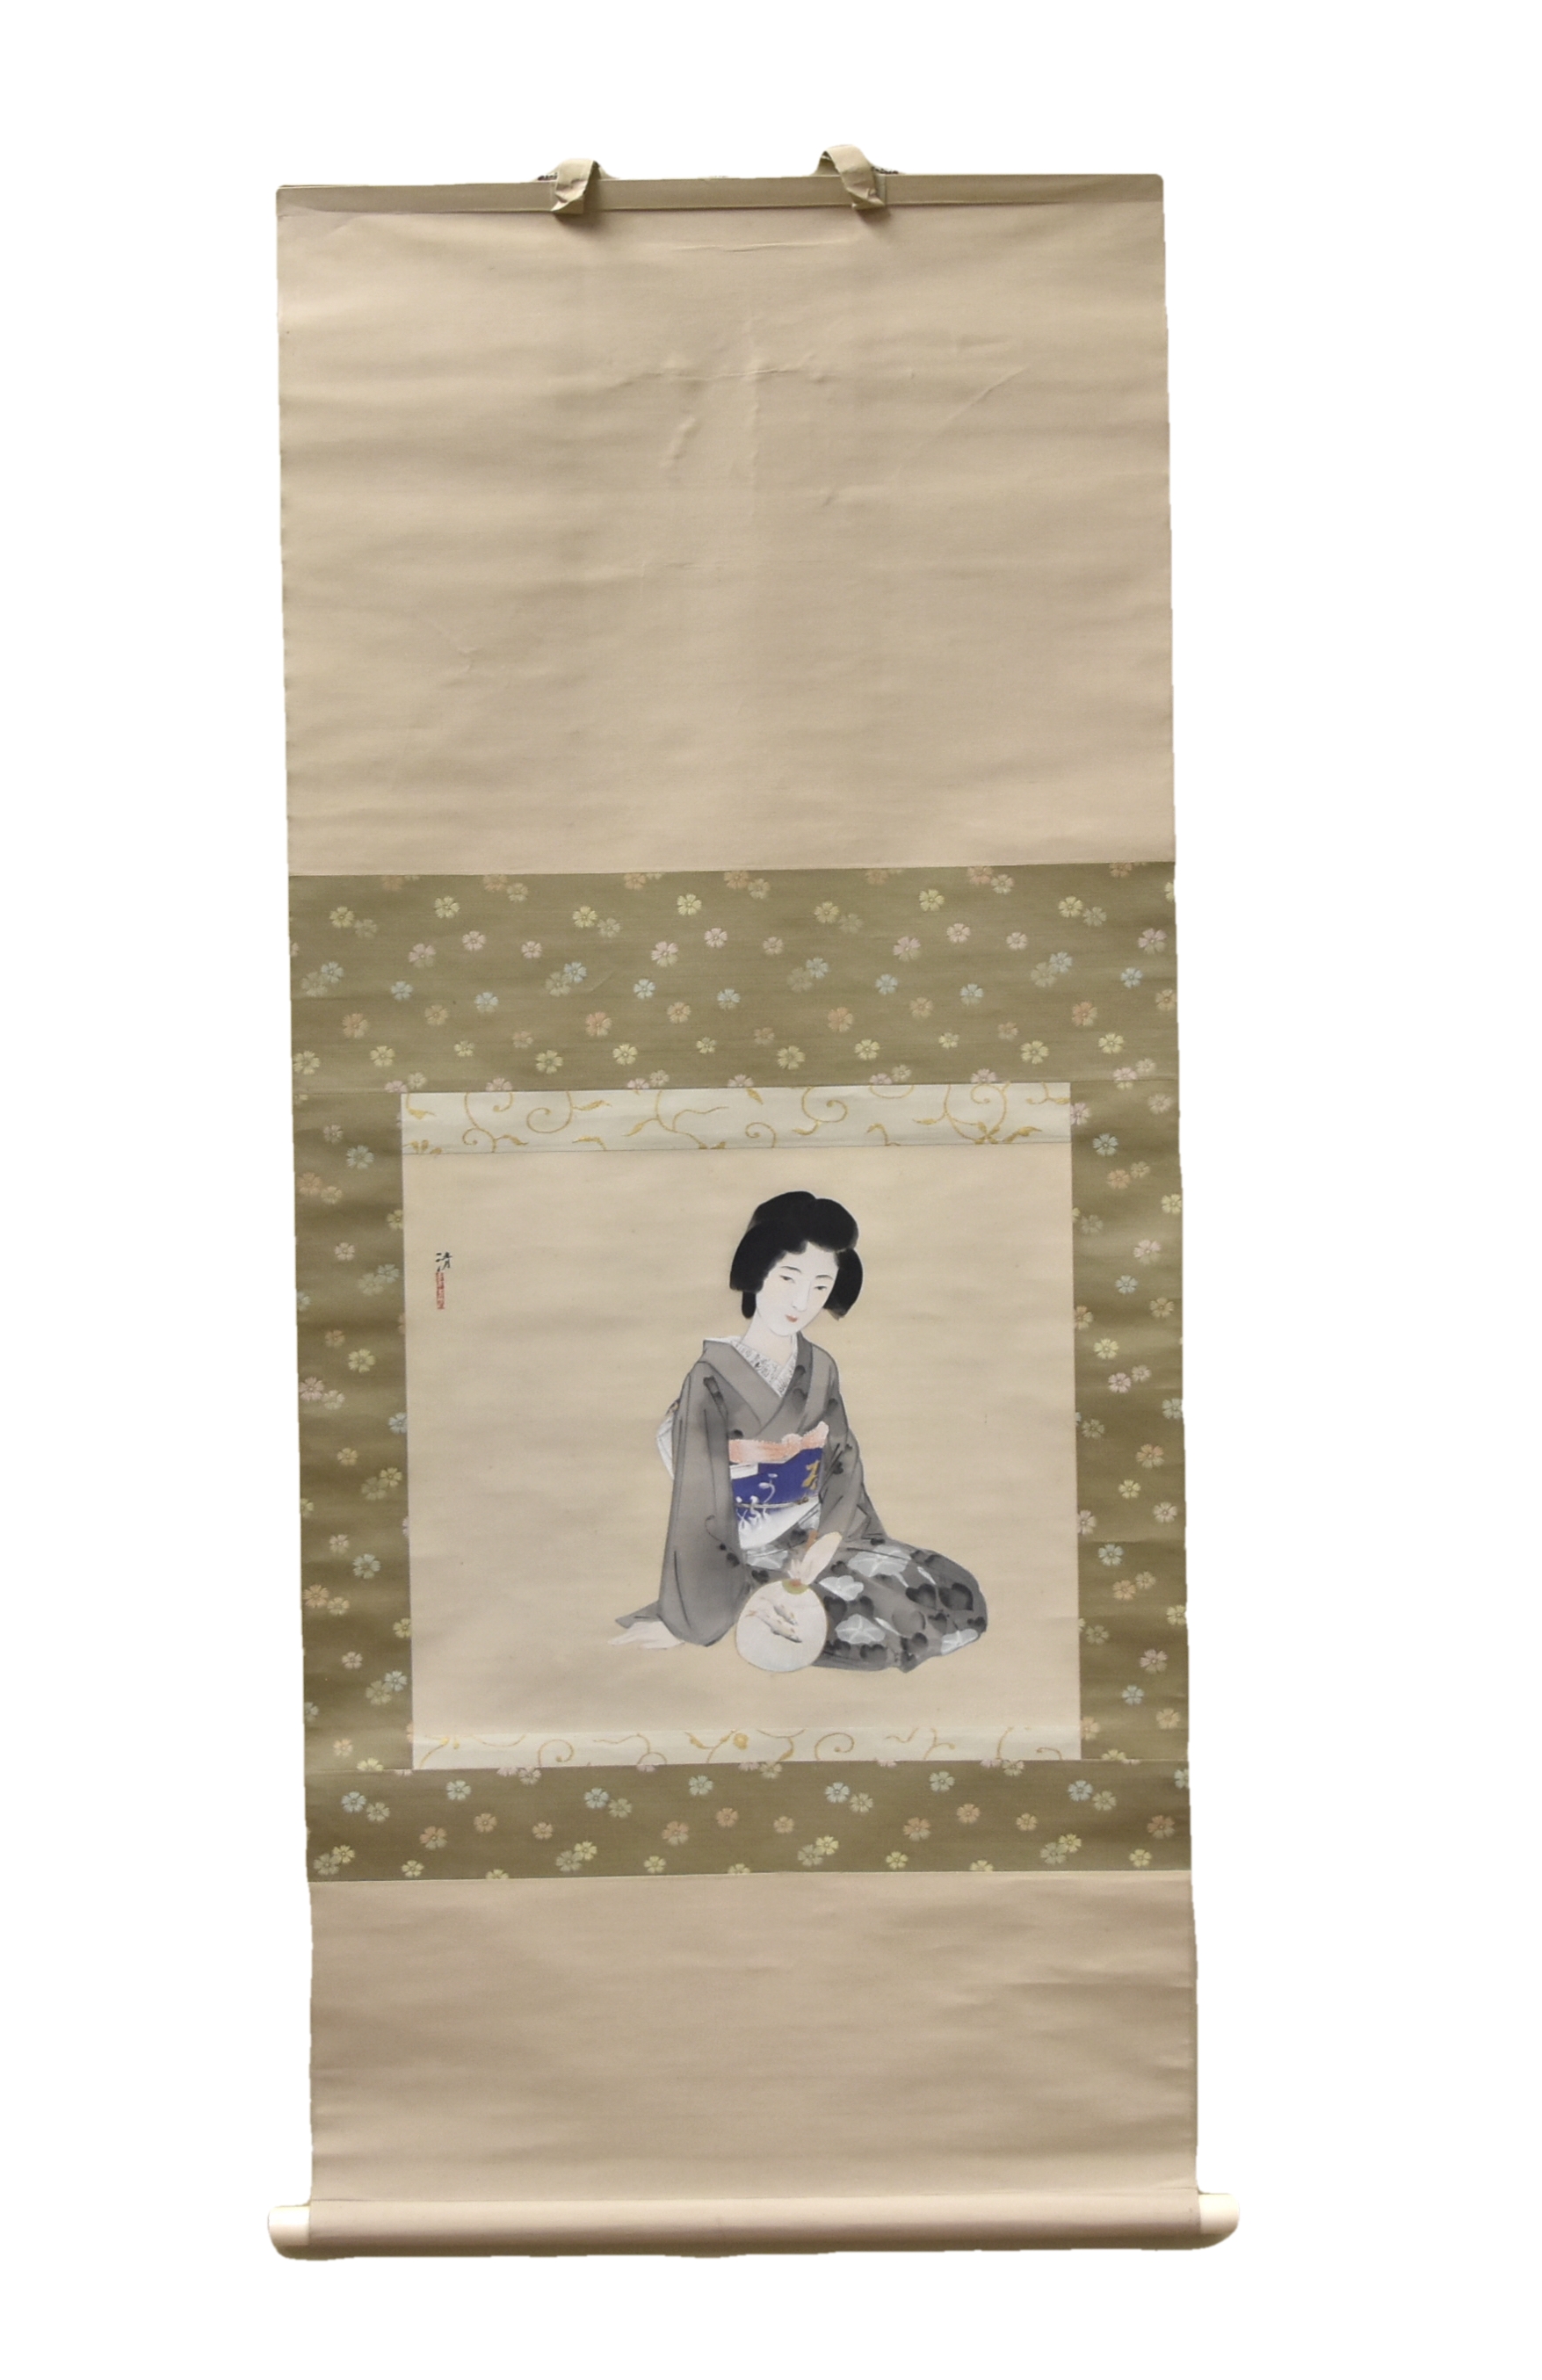 PAINTING OF A JAPANESE FEMALE FIGURE